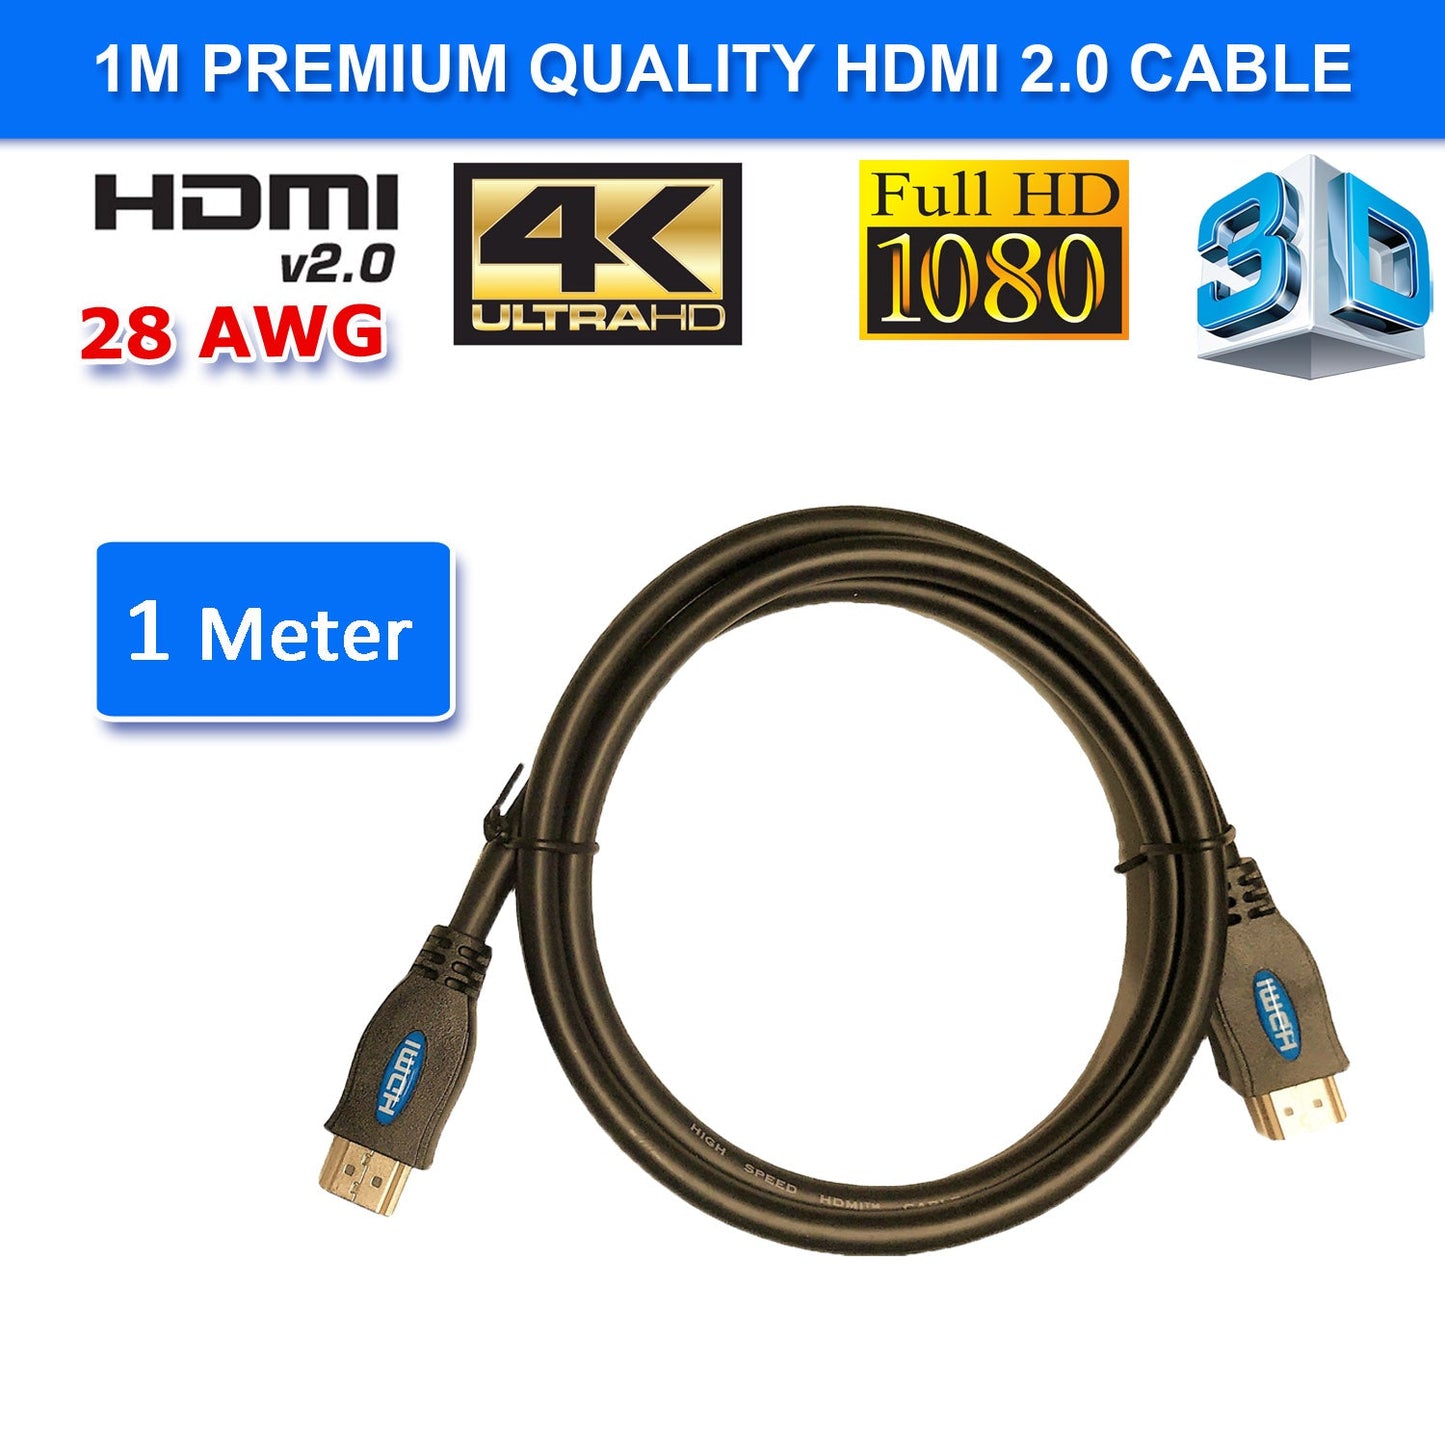 HDMI 2.0 High Speed Cable 1M Gold Plated Connectors Ethernet ARC HD 1080p 3D Cinema Plus 28AWG 4K 60Hz HDCP